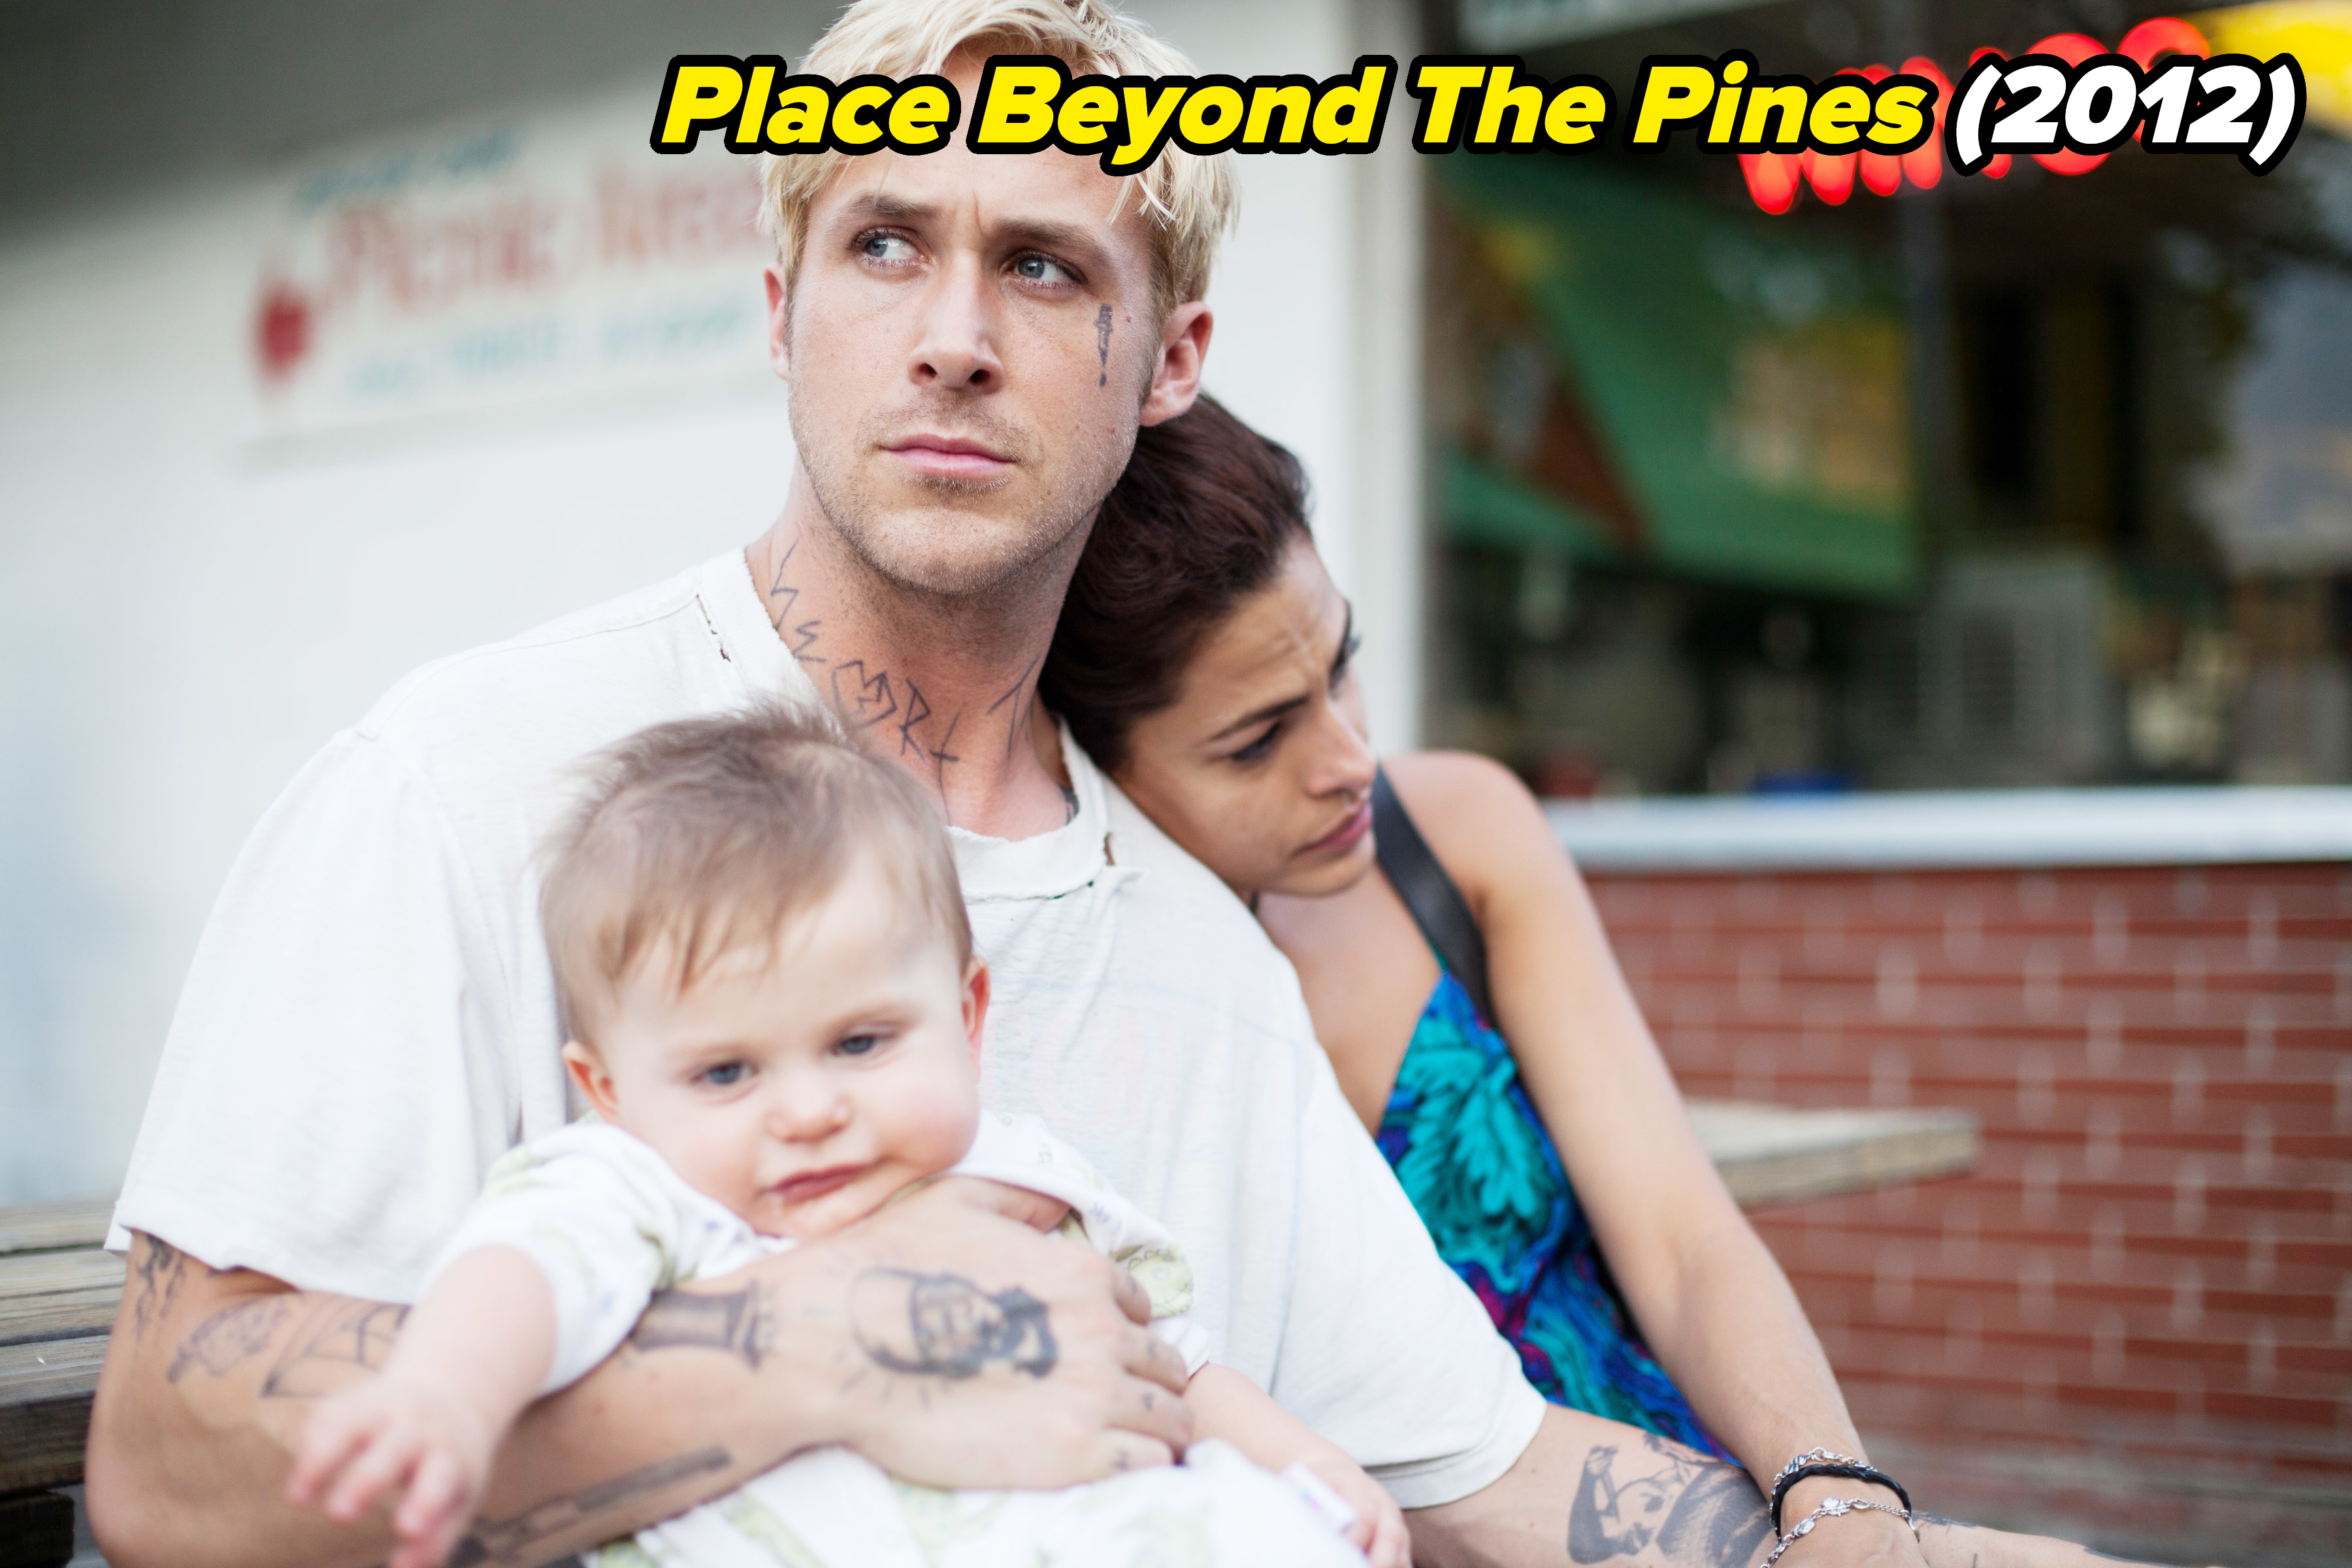 Ryan is sitting and holding a baby as Eva leans on him in a scene from The Place Beyond The Pines